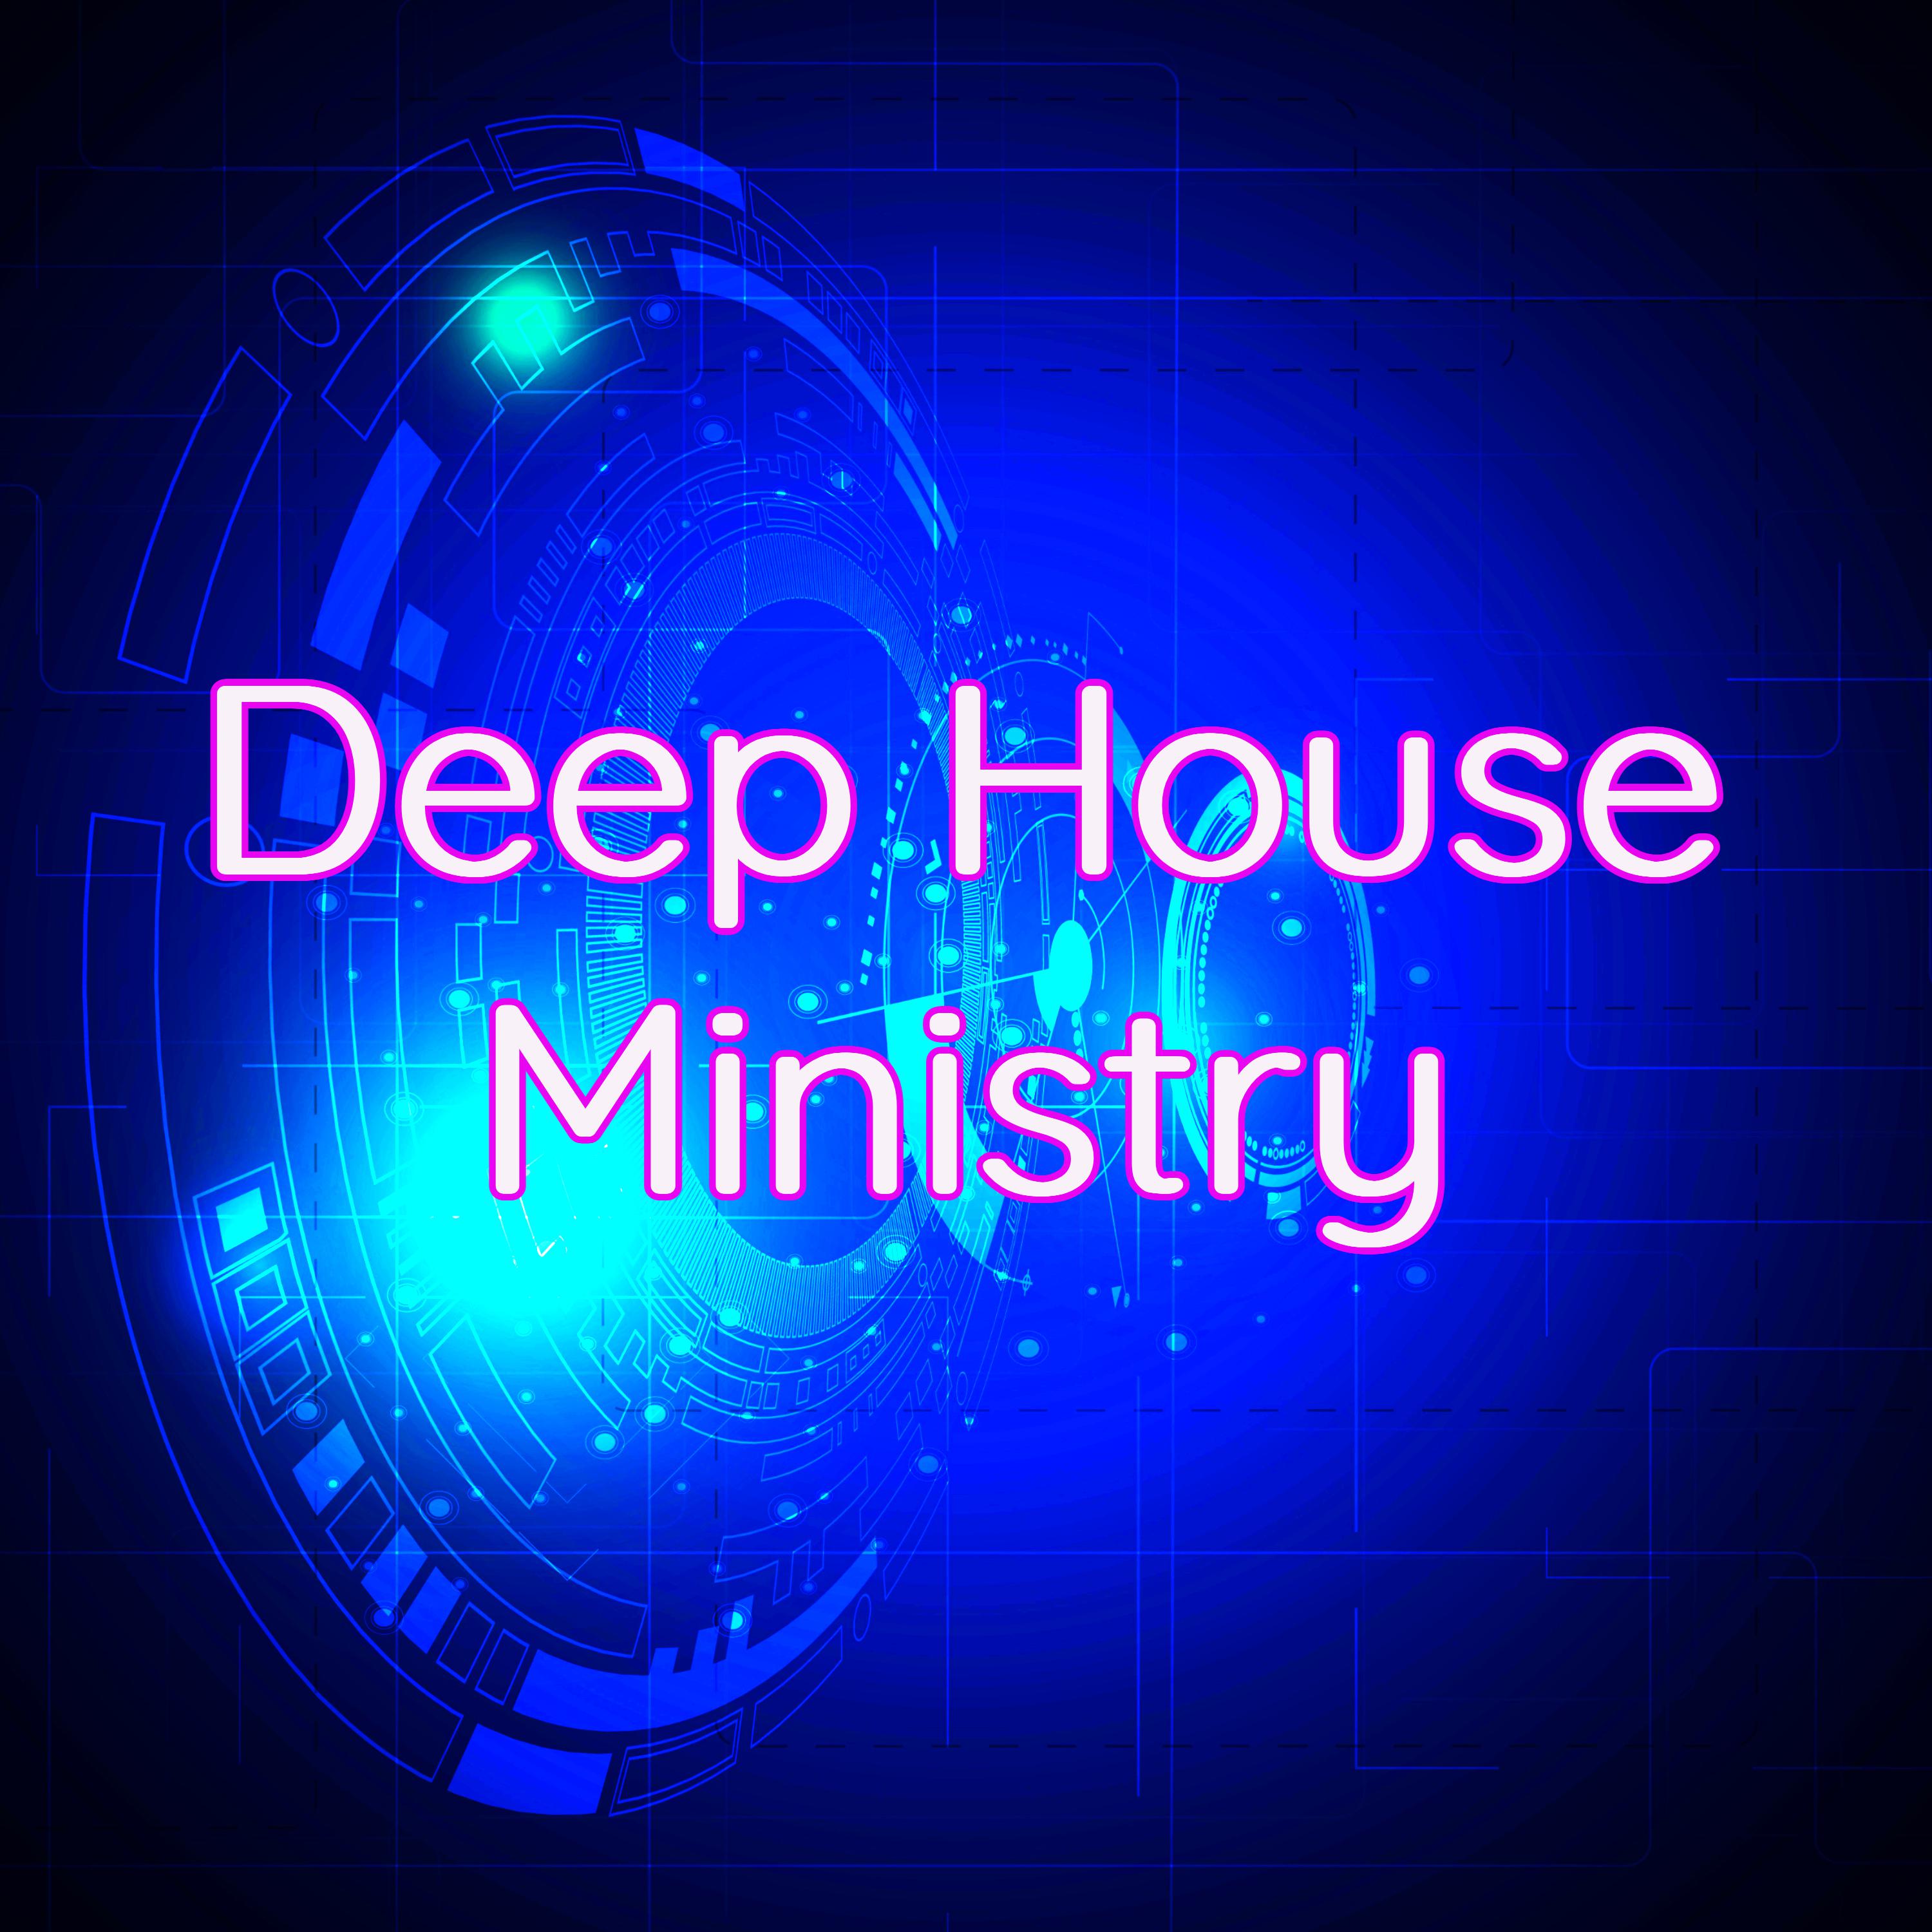 Deep House Ministry  Party House Music 2019